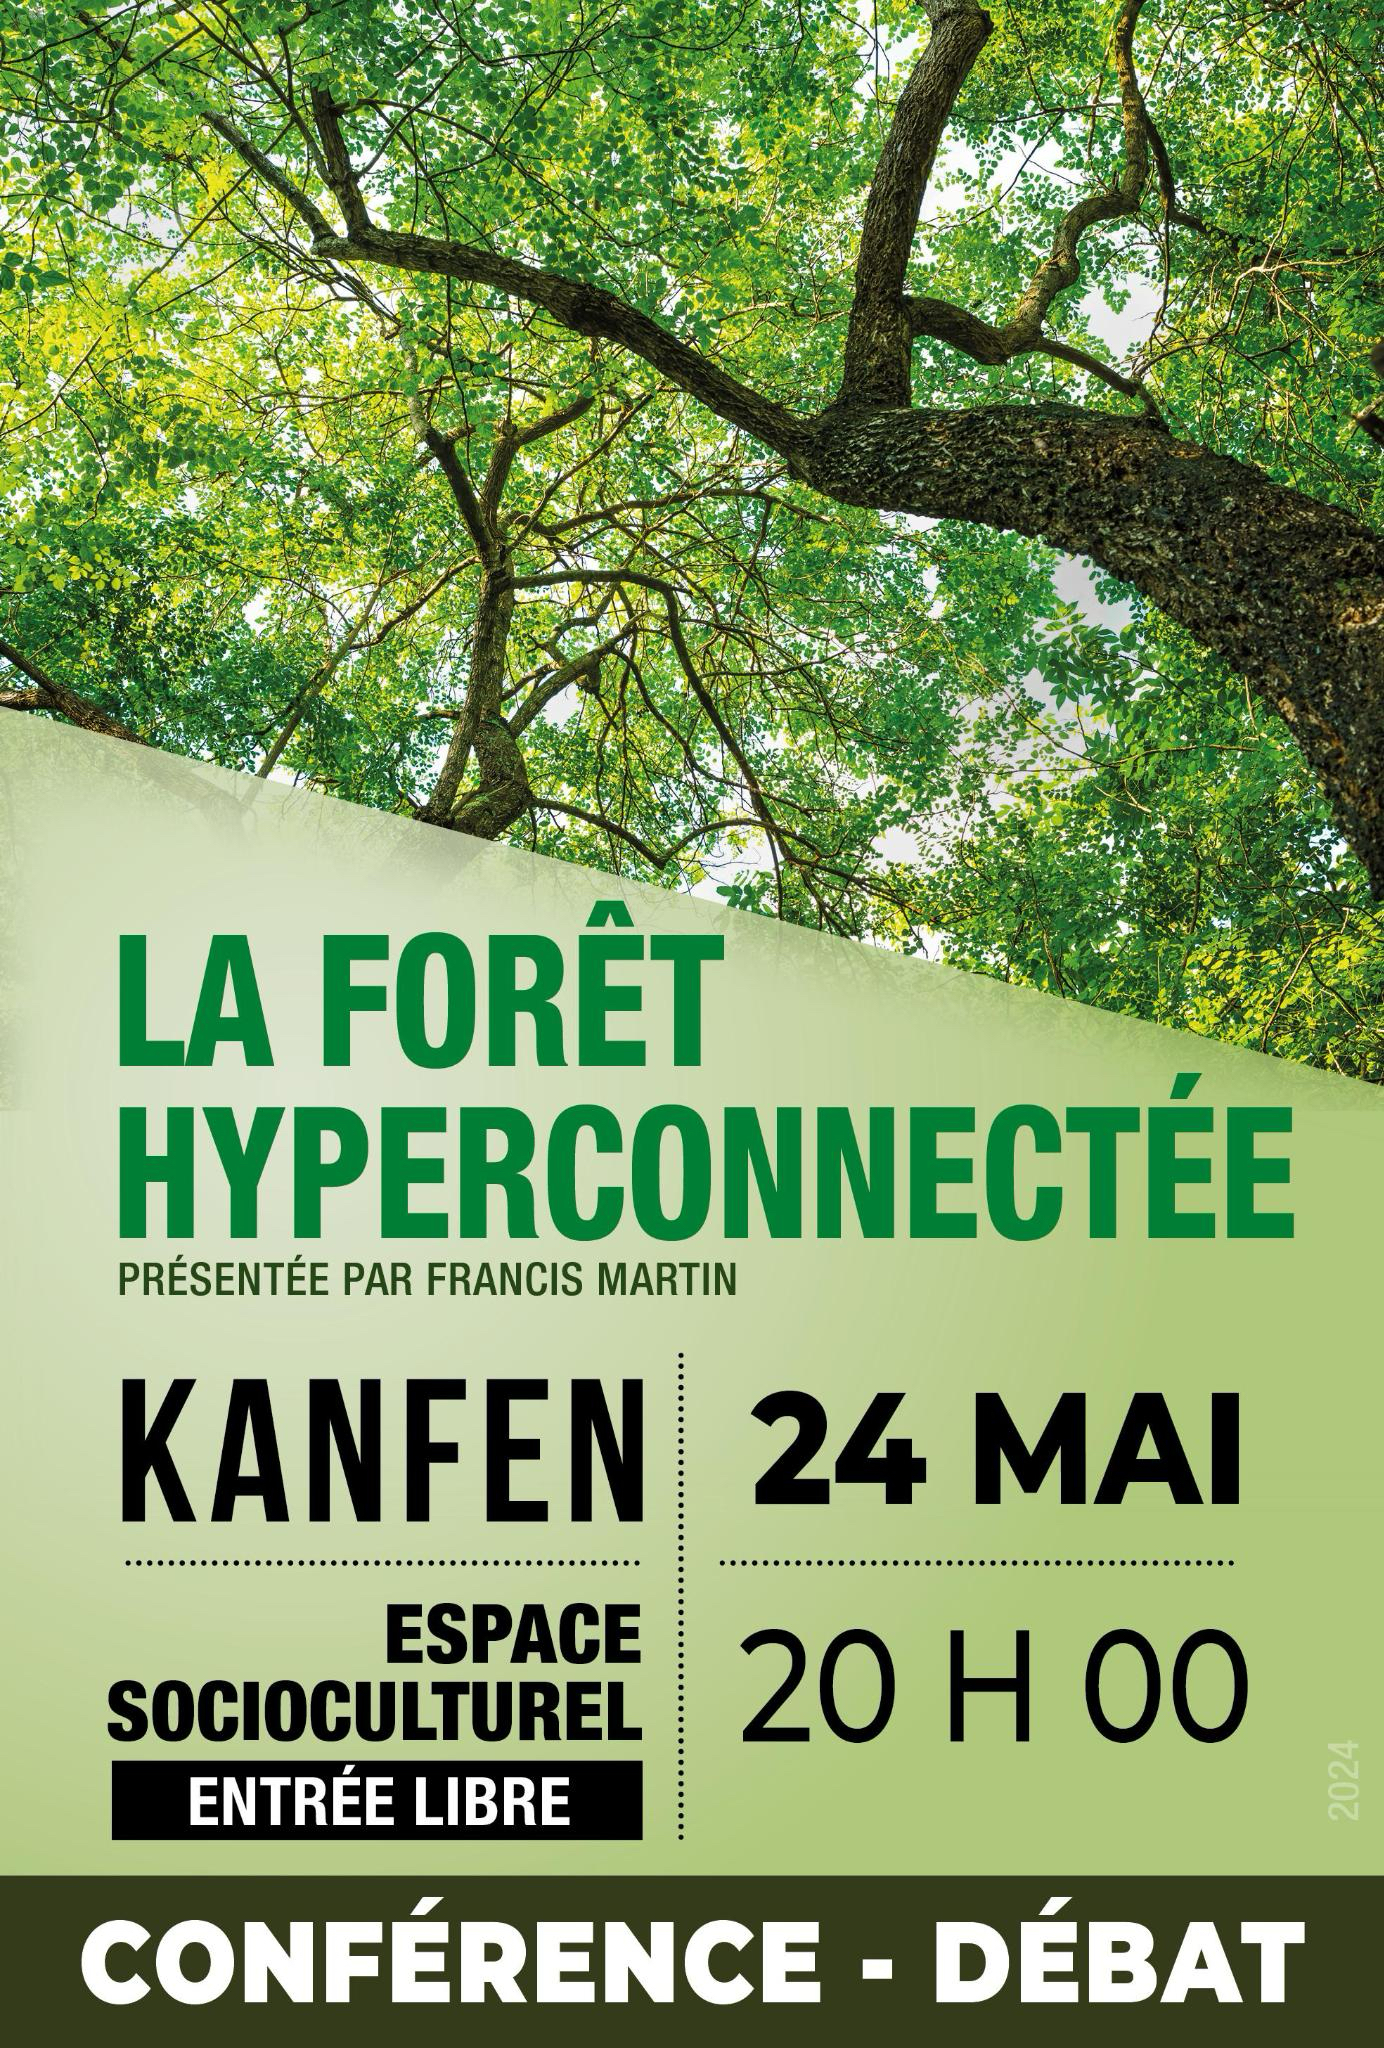 The hyperconnected forest - conference